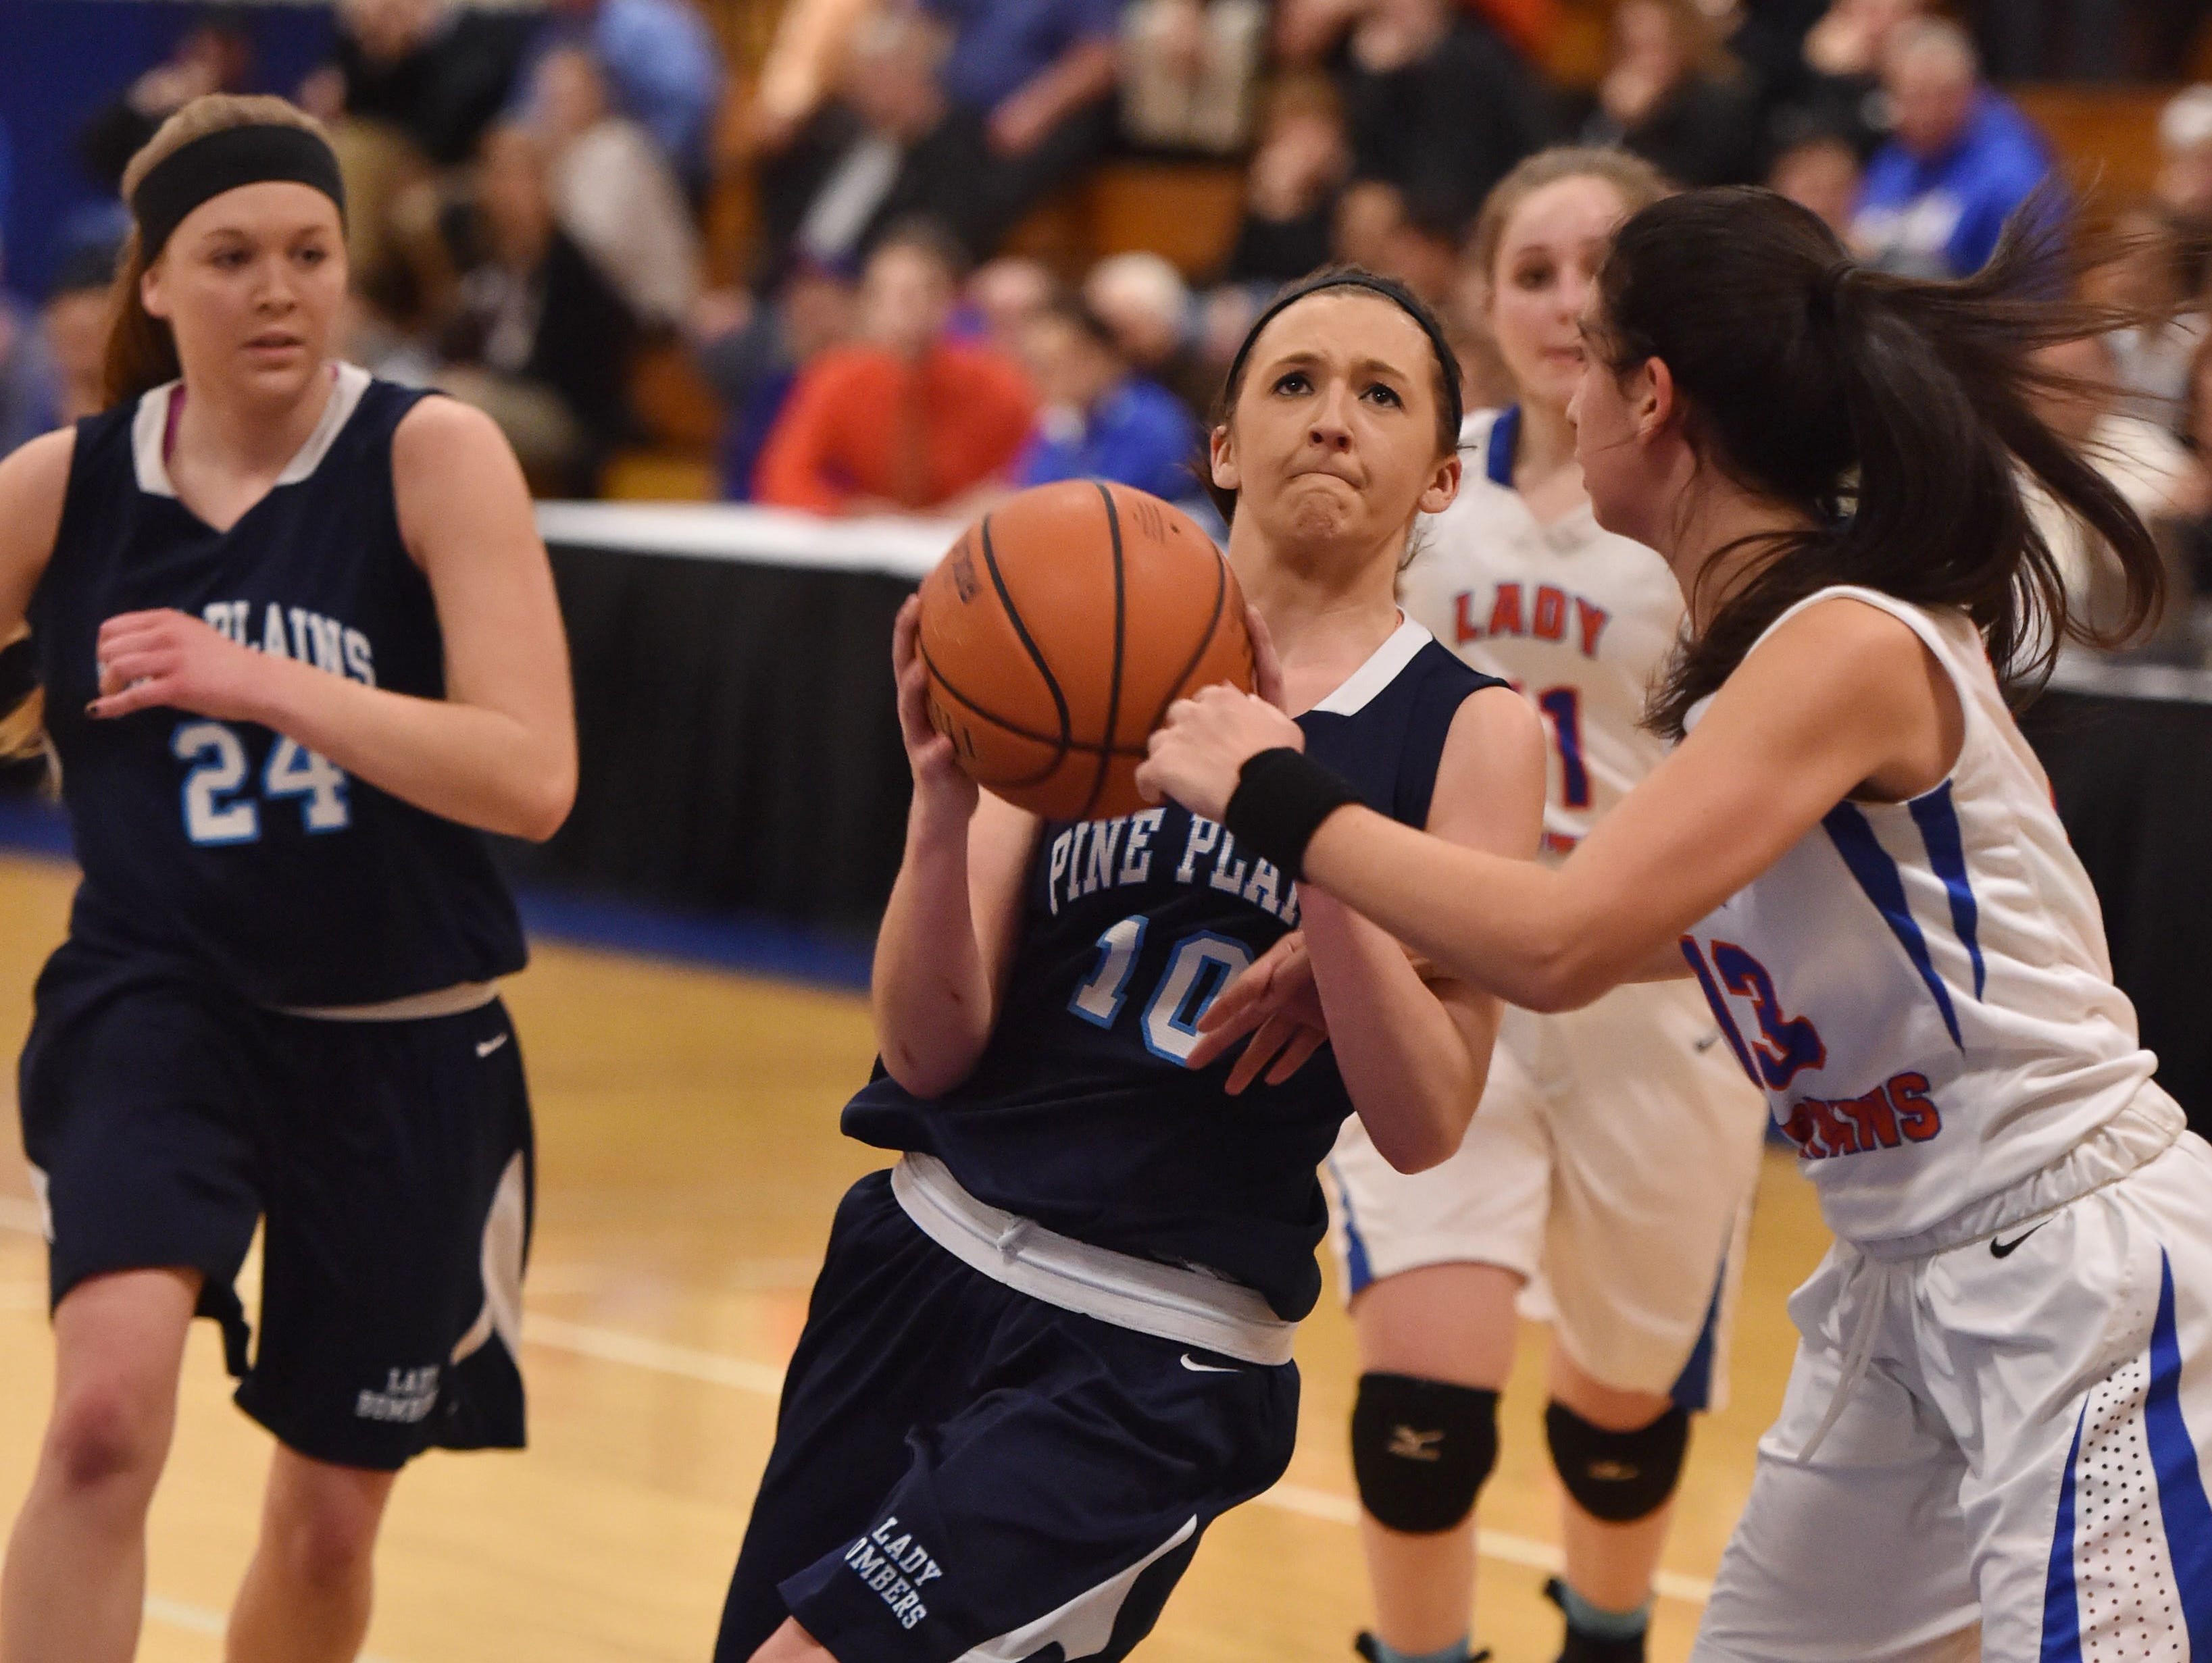 Pine Plains' Michaella Lamont drives to the basket during the Section 9 Class C final against S.S. Seward at Mount Saint Mary College in Newburgh on Feb. 25.